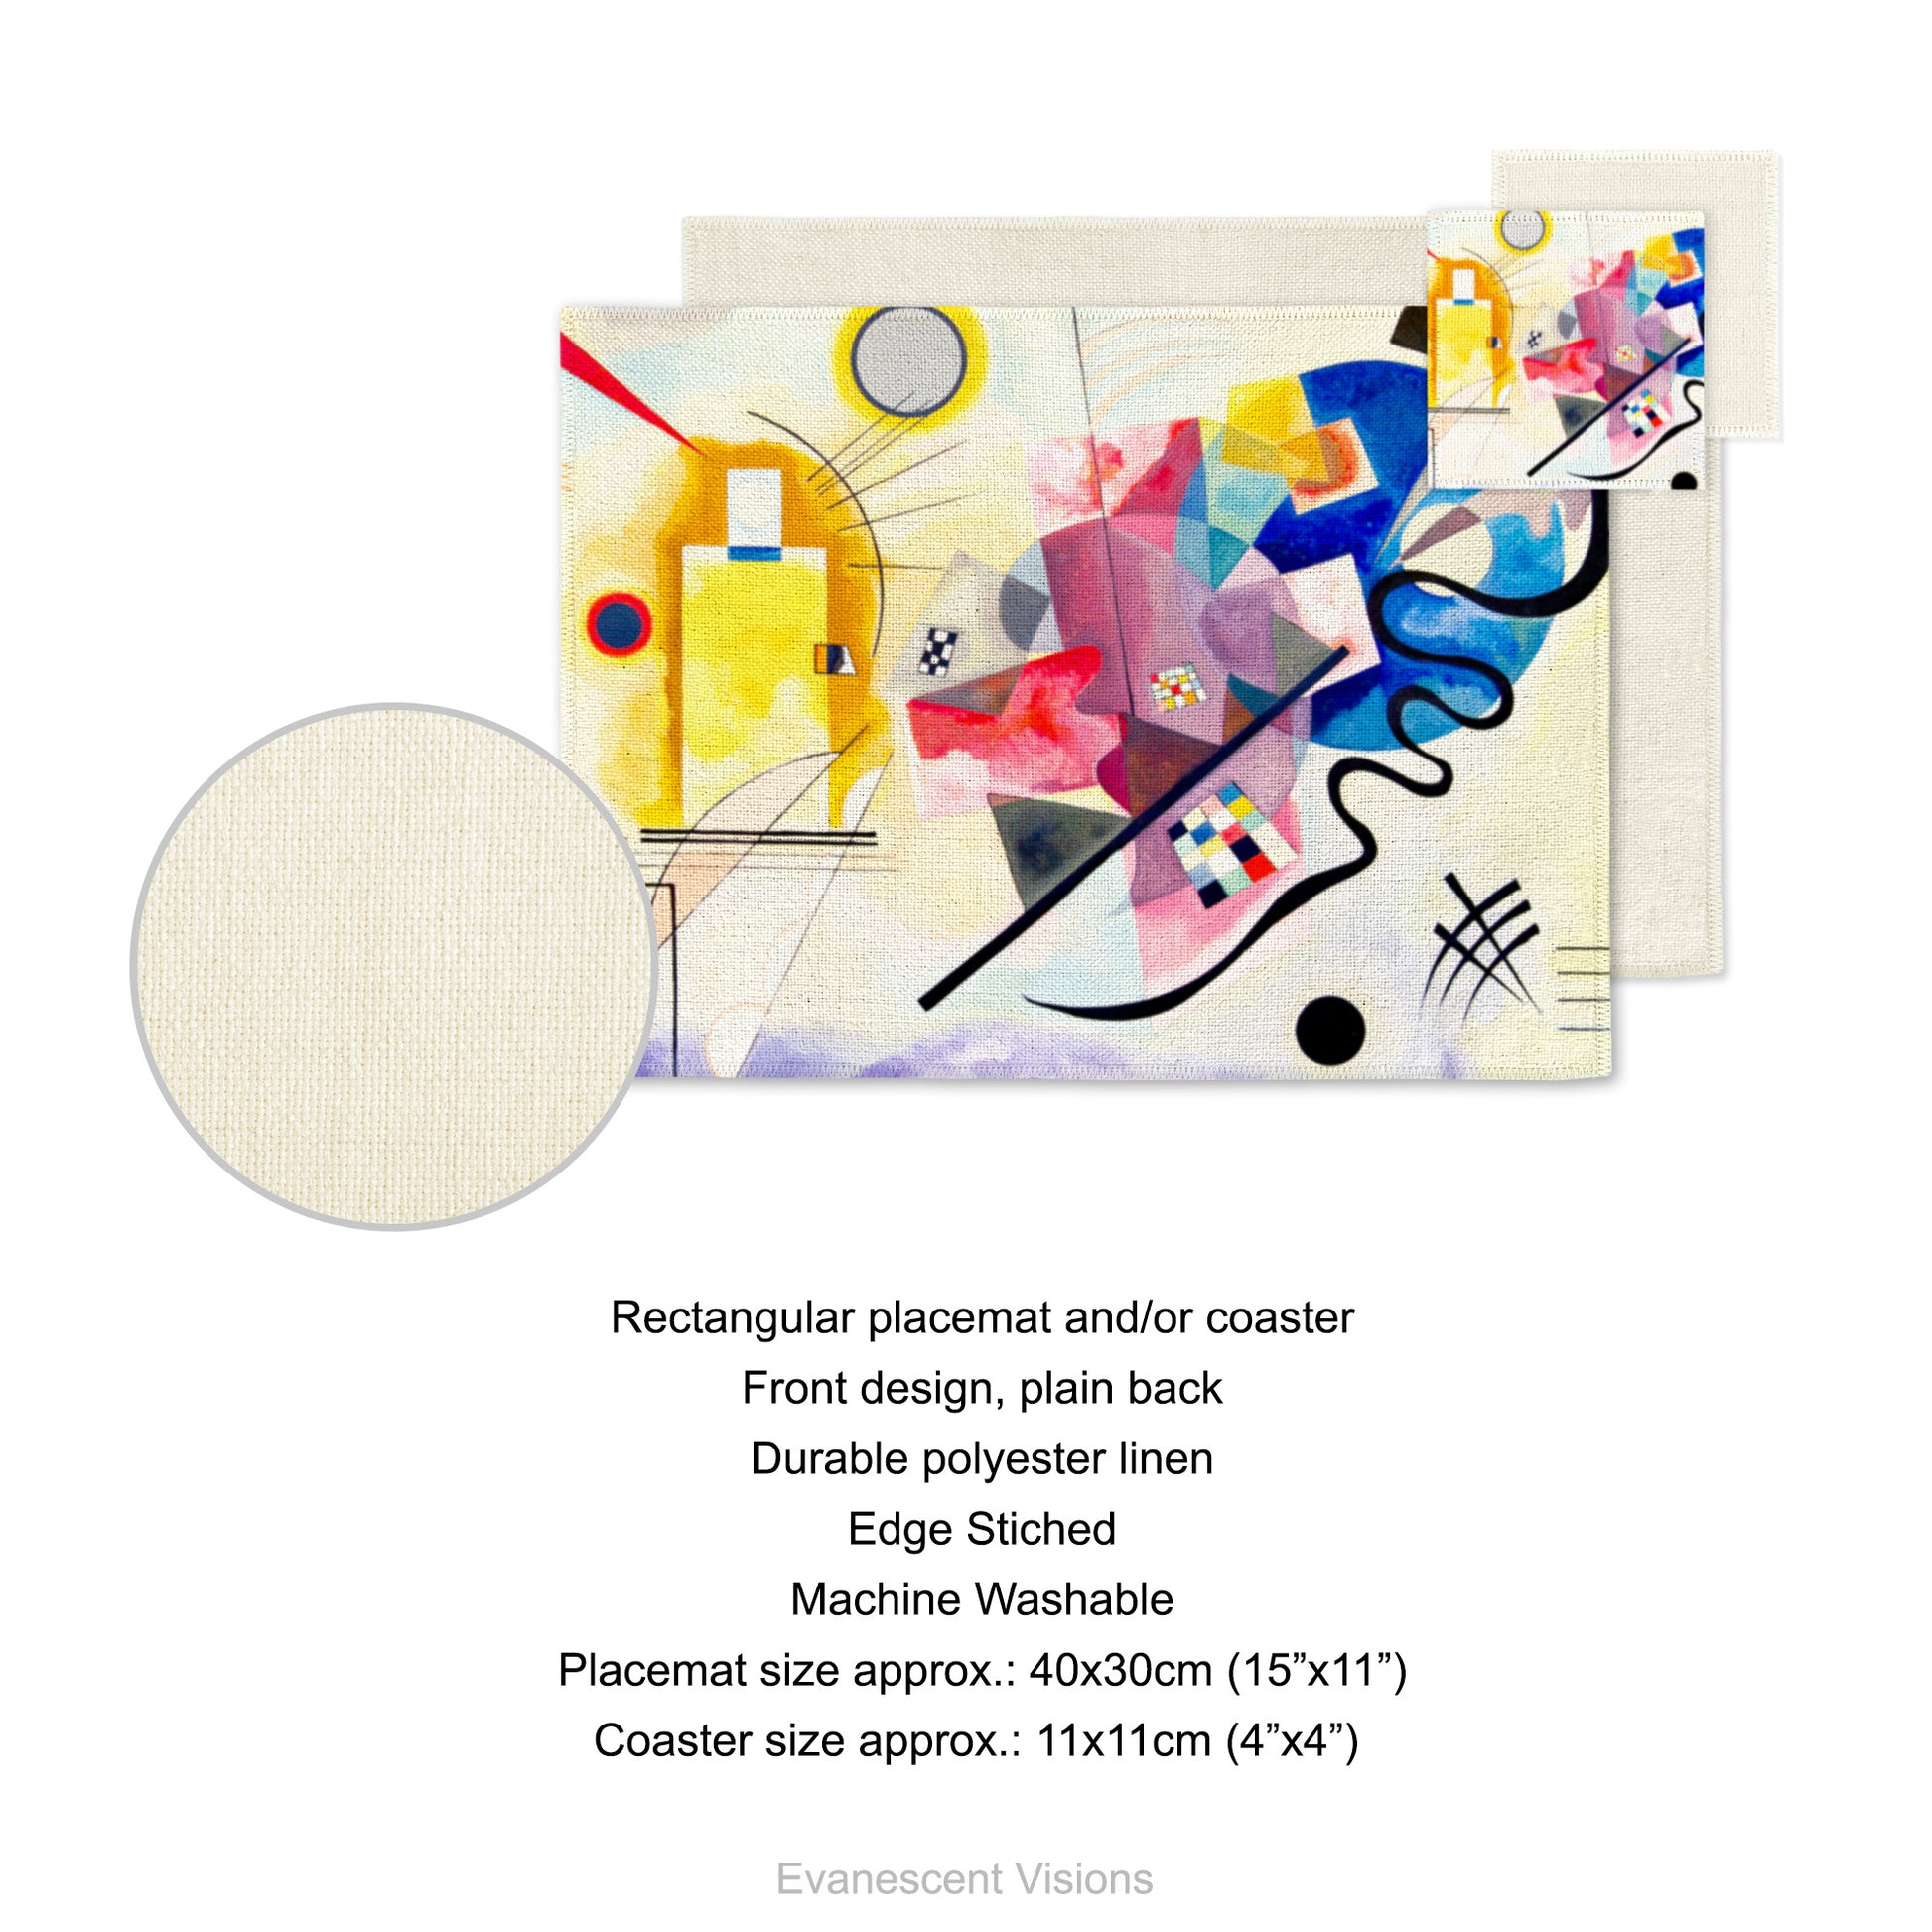 Product details for placemat and coaster. Front design, plain back, durable polyester linen, edge sticked, machine washable. Placemat size approx 40x30cm (15"x11"). Coaster size approx 11x11cm (4"x4") Placemat and coaster shows the artwork 'Jaune, Rouge, Bleu' by artist Wassily Kandinsky.